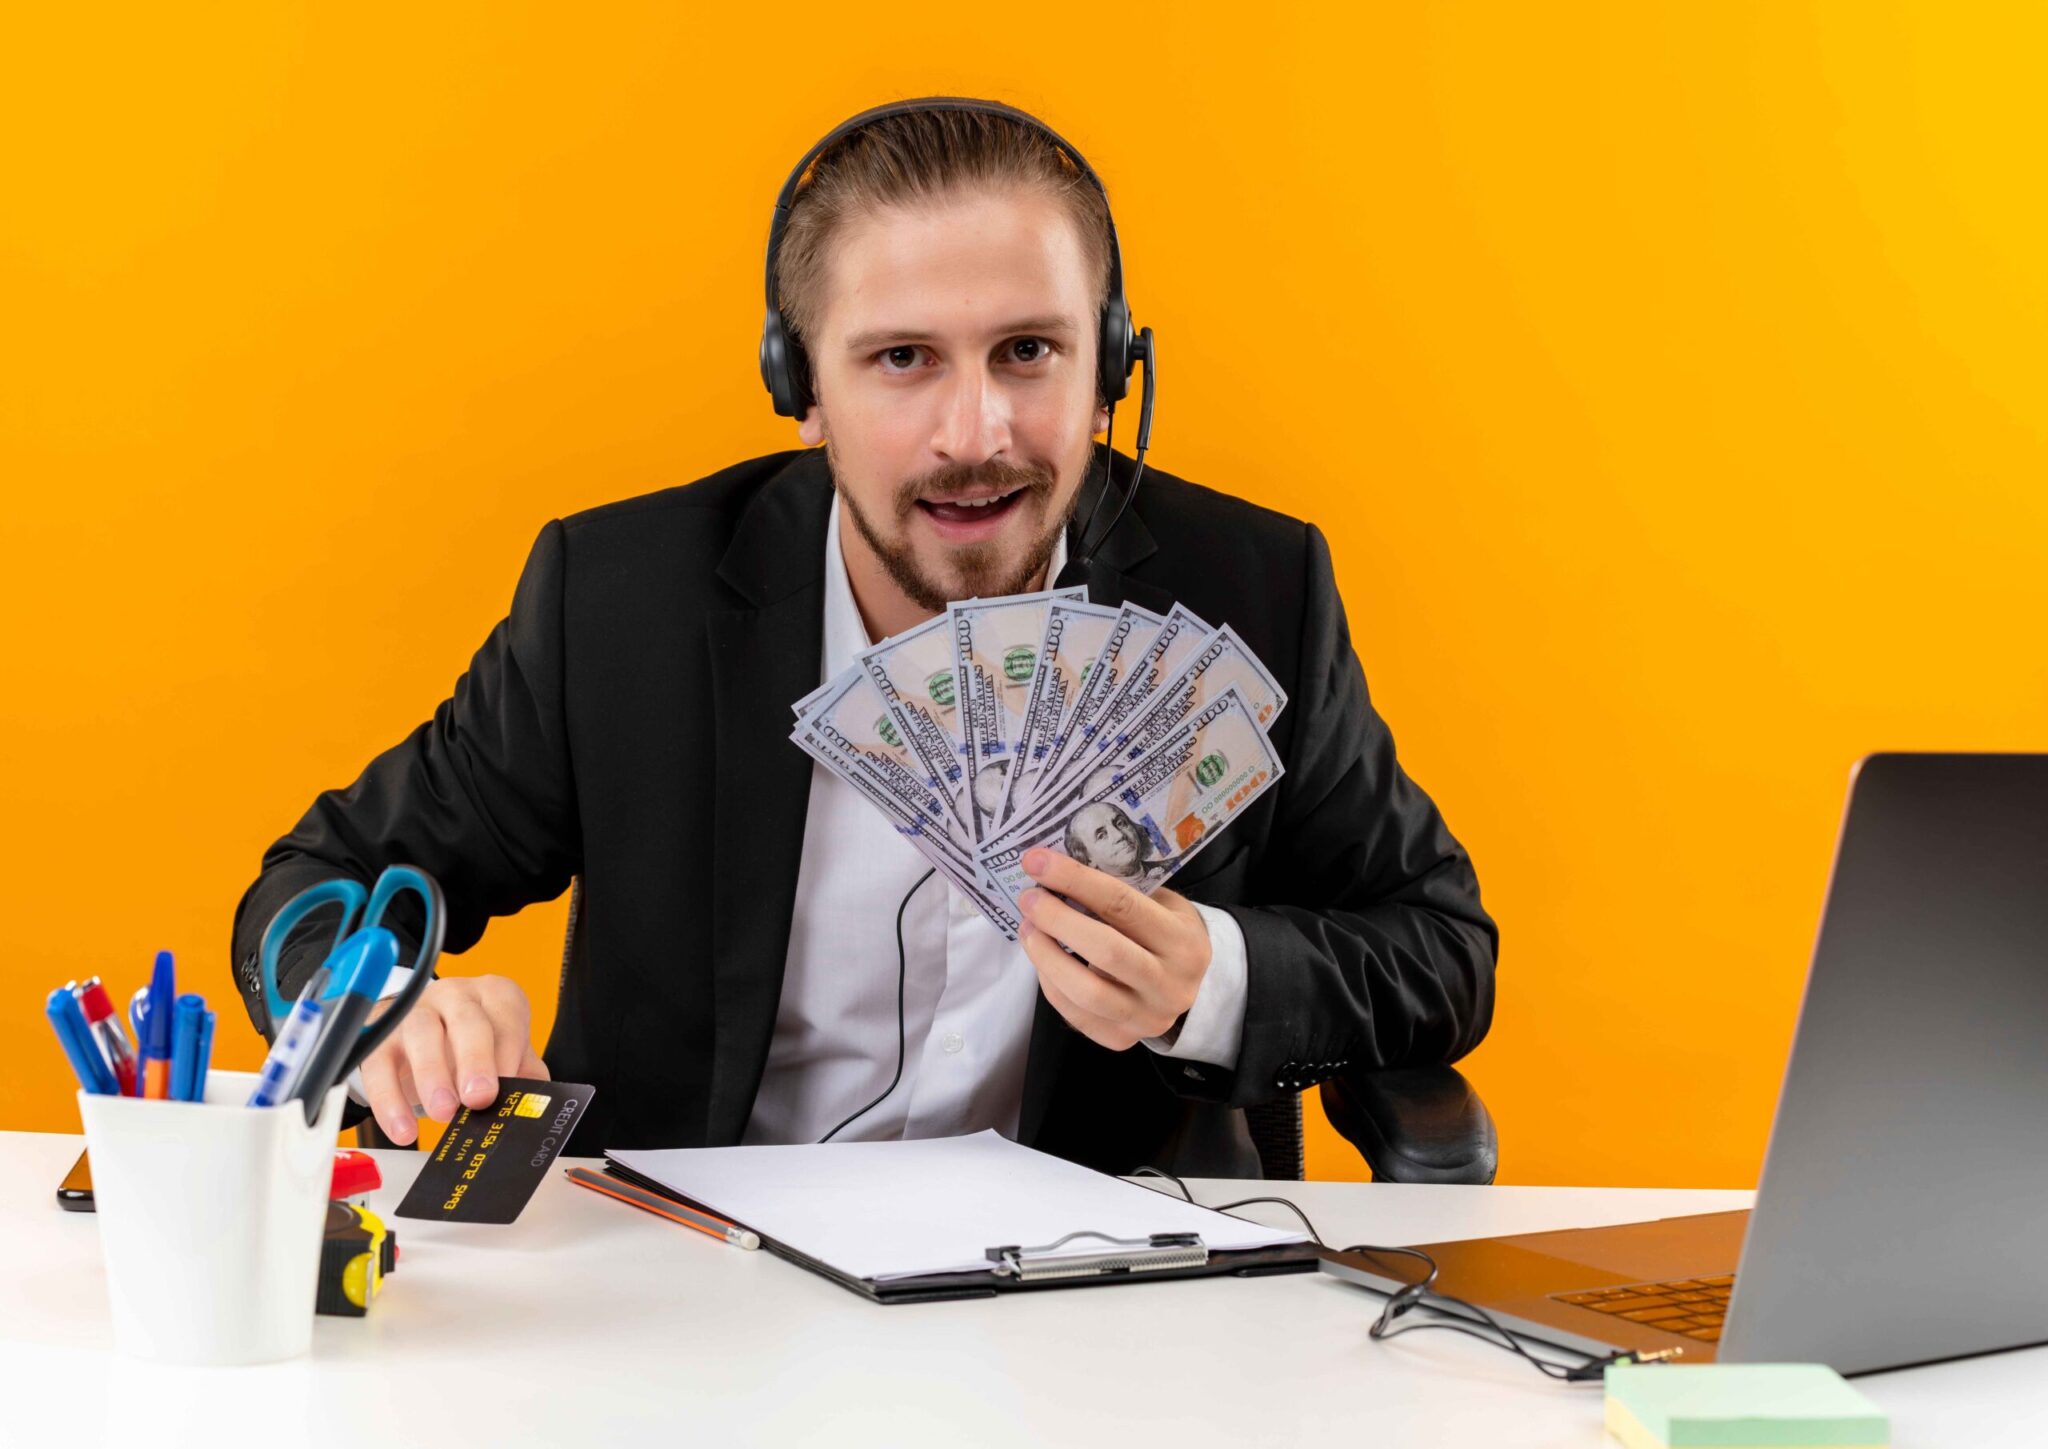 handsome-businessman-suit-headphones-with-microphone-showing-cush-looking-camera-happy-excited-sitting-table-office-orange-background